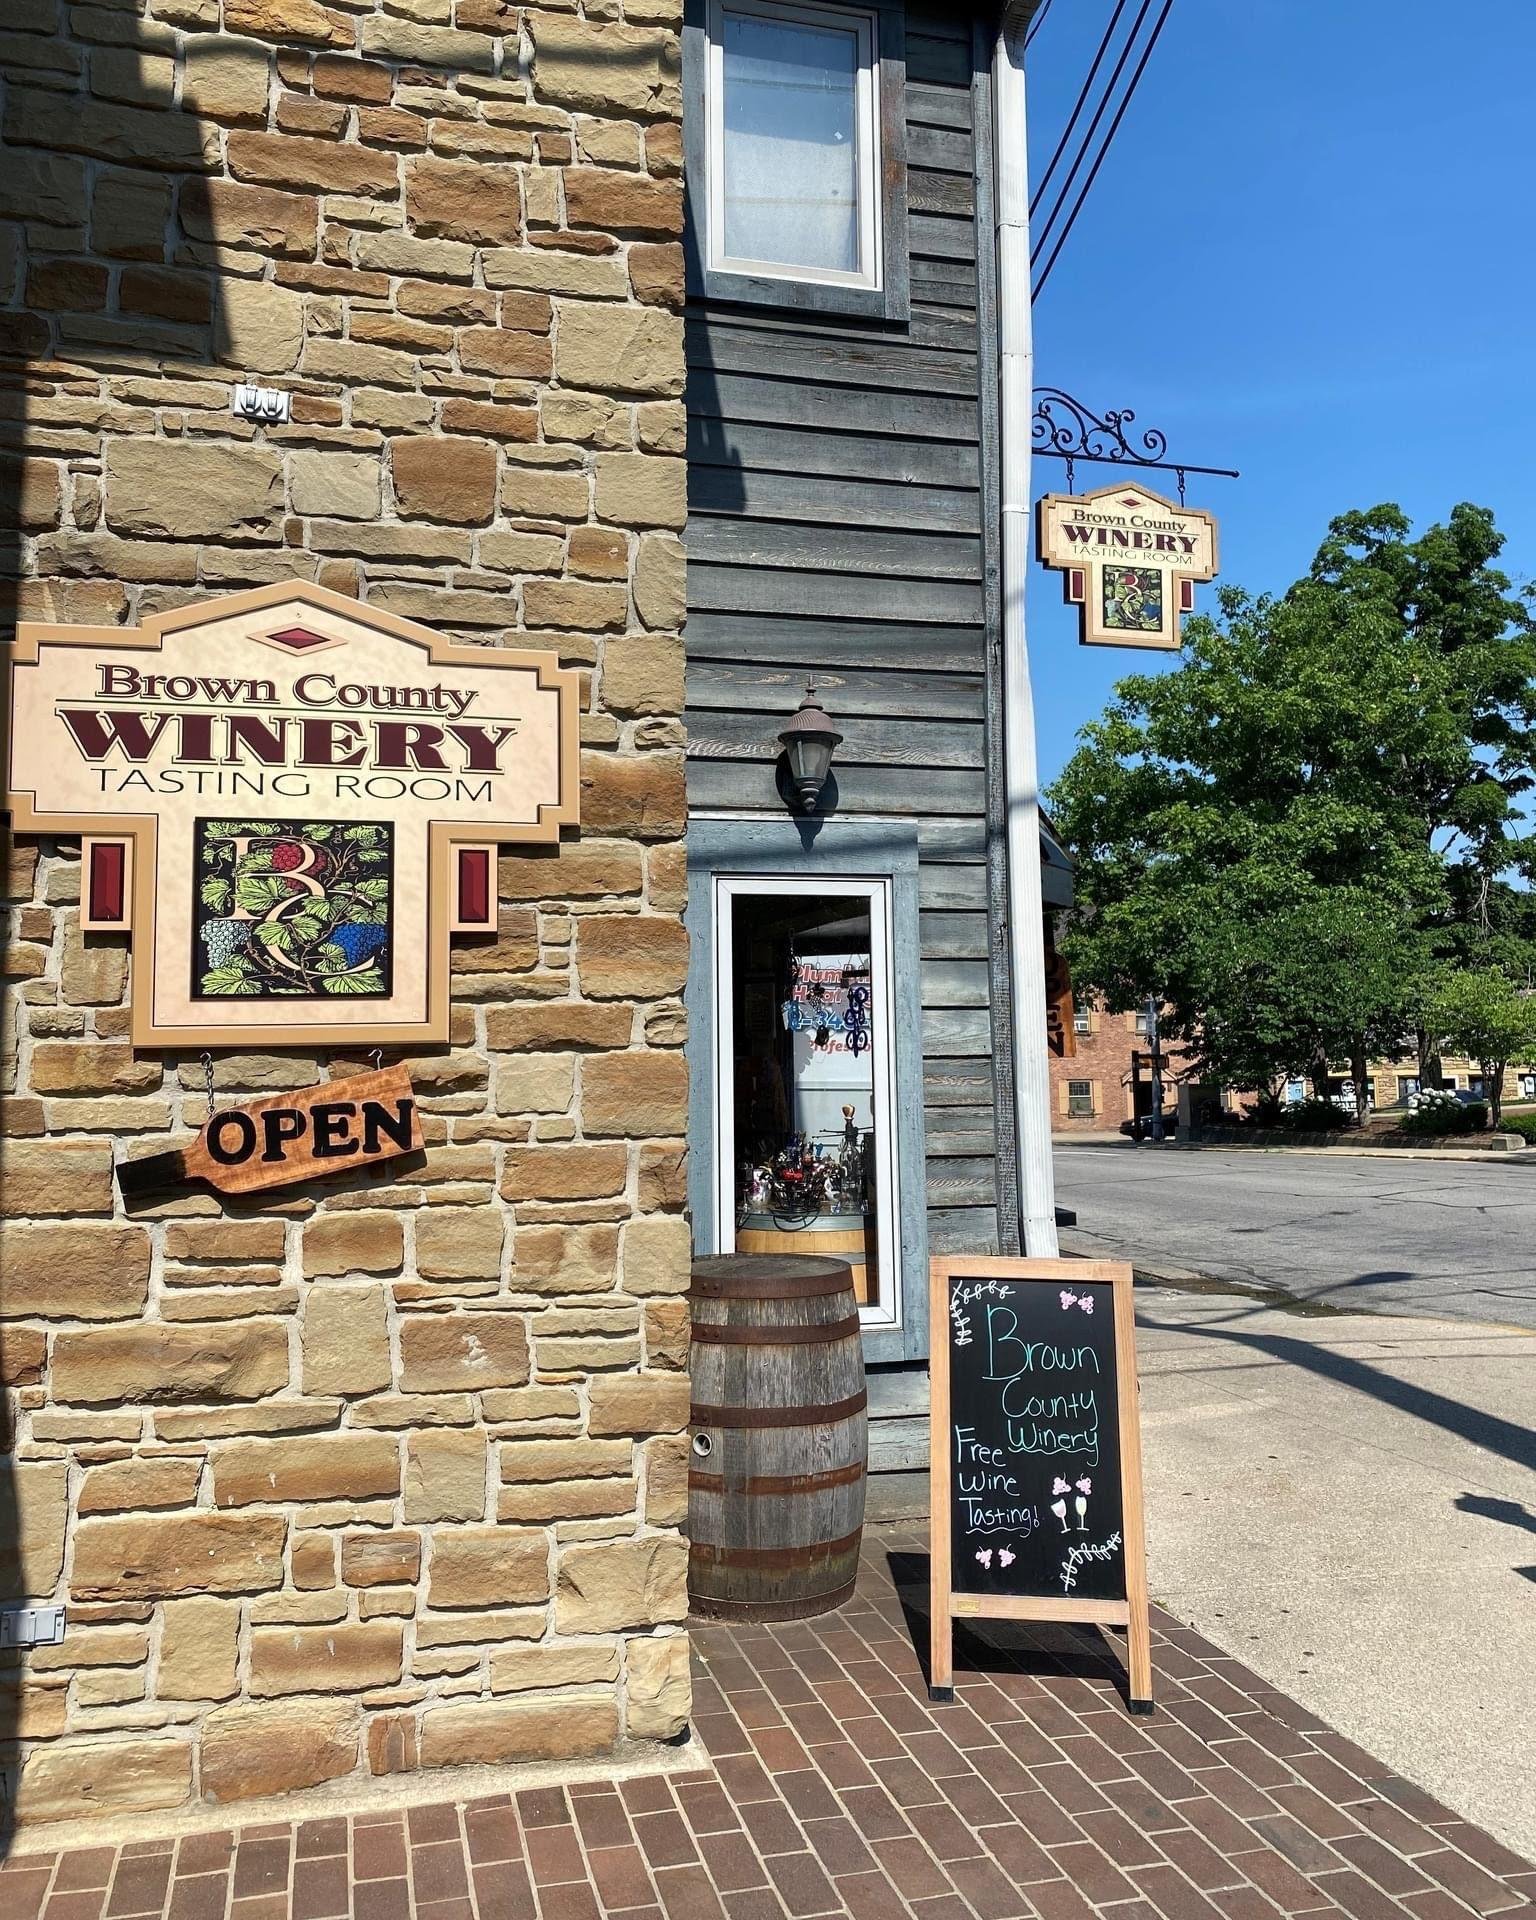 Memorial Day Weekend is only one week away! ☀🍷

Come see us to stock up on your favorite Brown County Wine to celebrate!

If you don't have any special plans yet, come see us! We will be open our usual business hours all weekend and that Monday. 

#